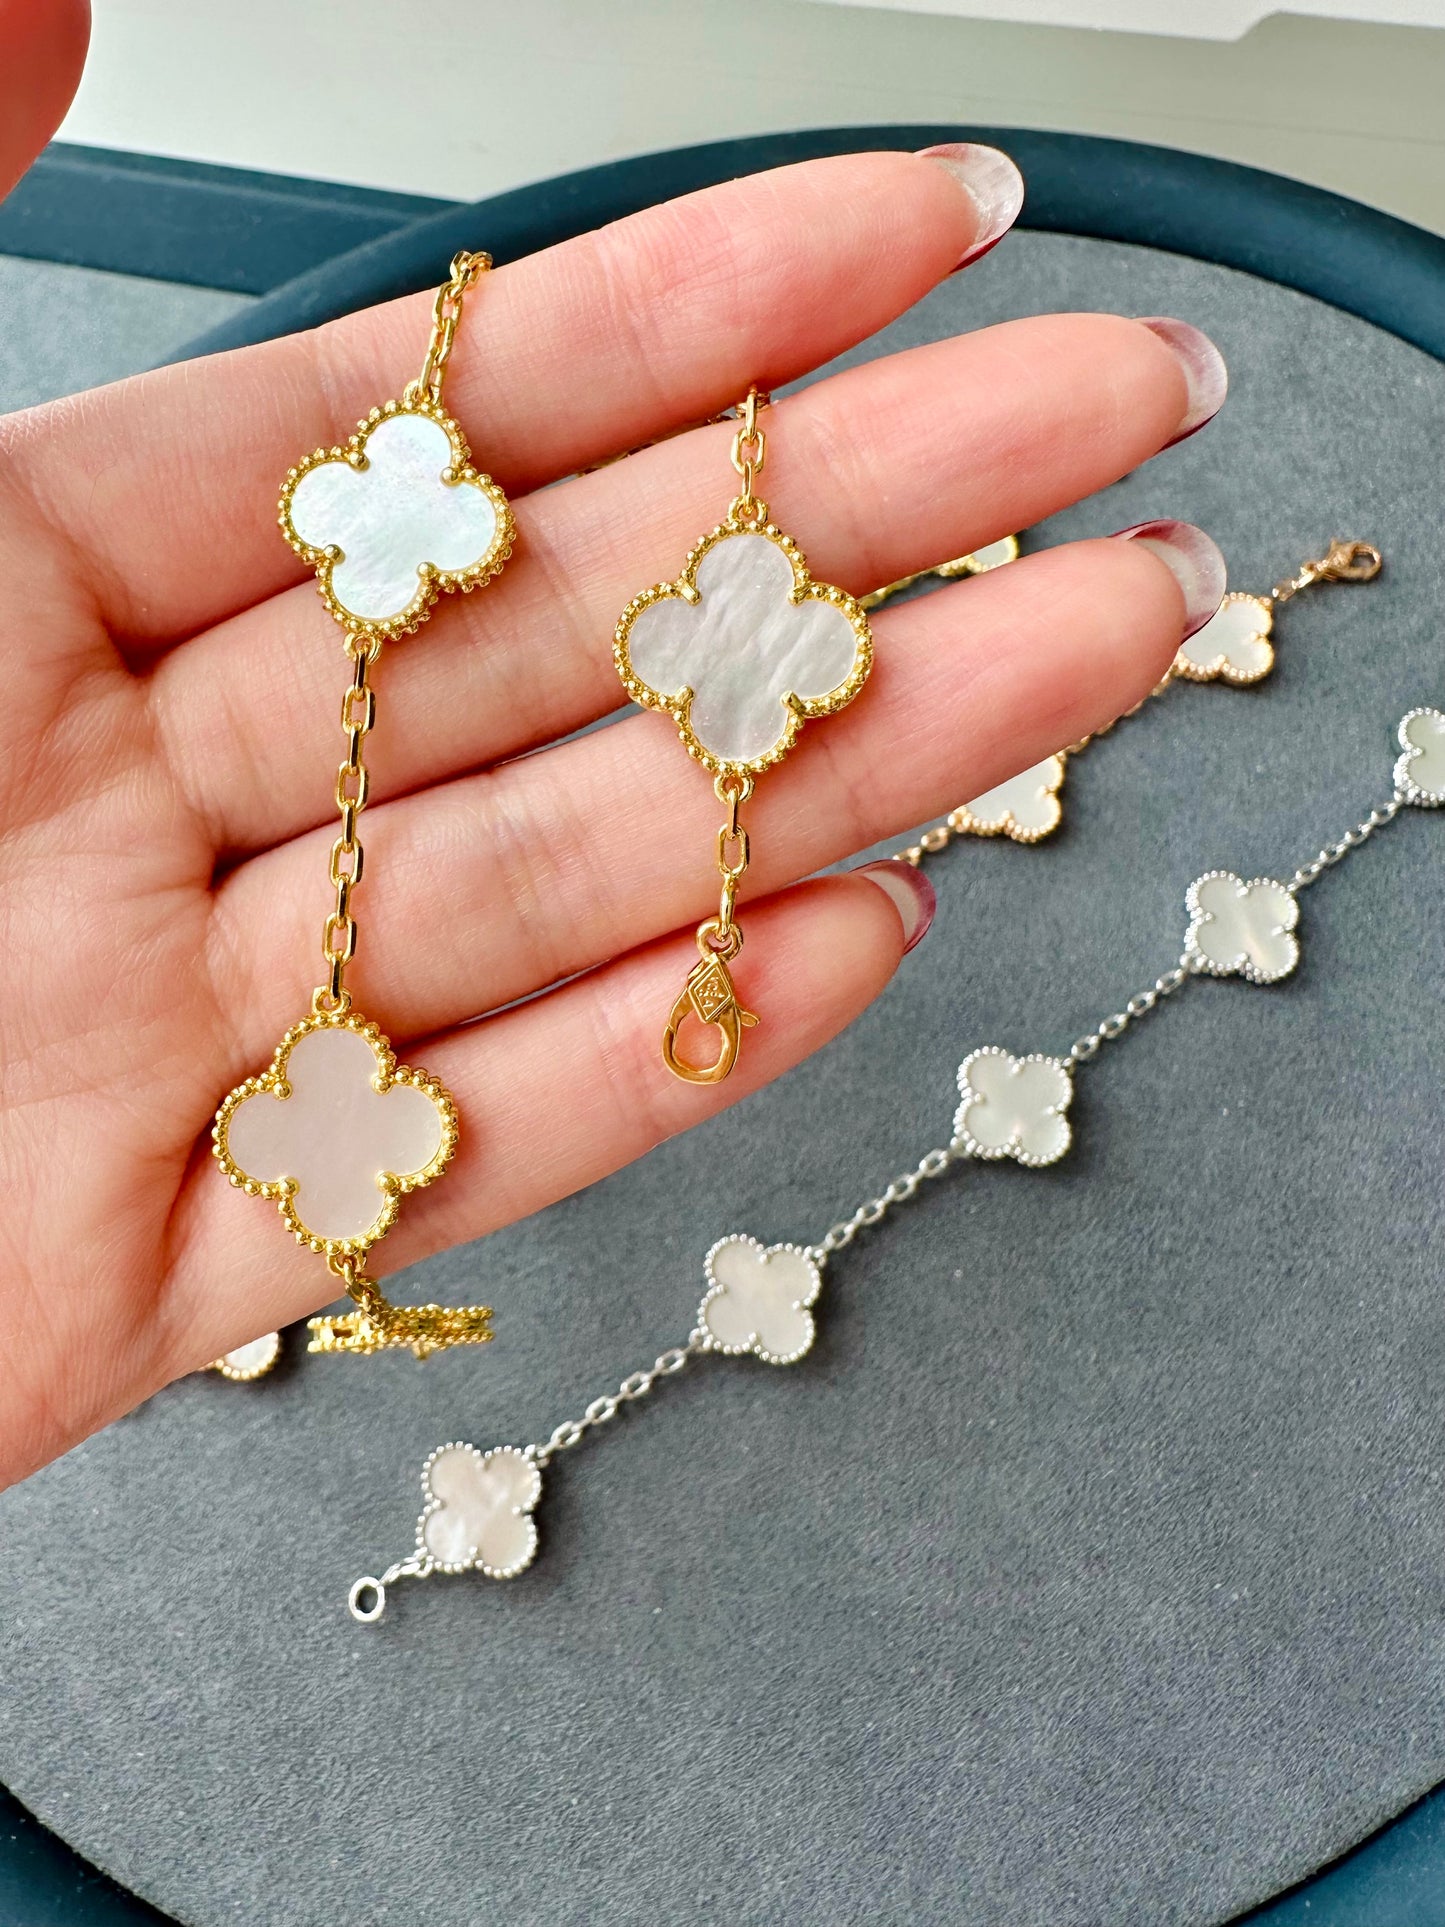 15mm White mother of pearl 5 motifs clover bracelet 925 silver with 18k gold plated 7.5 inches - ParadiseKissCo